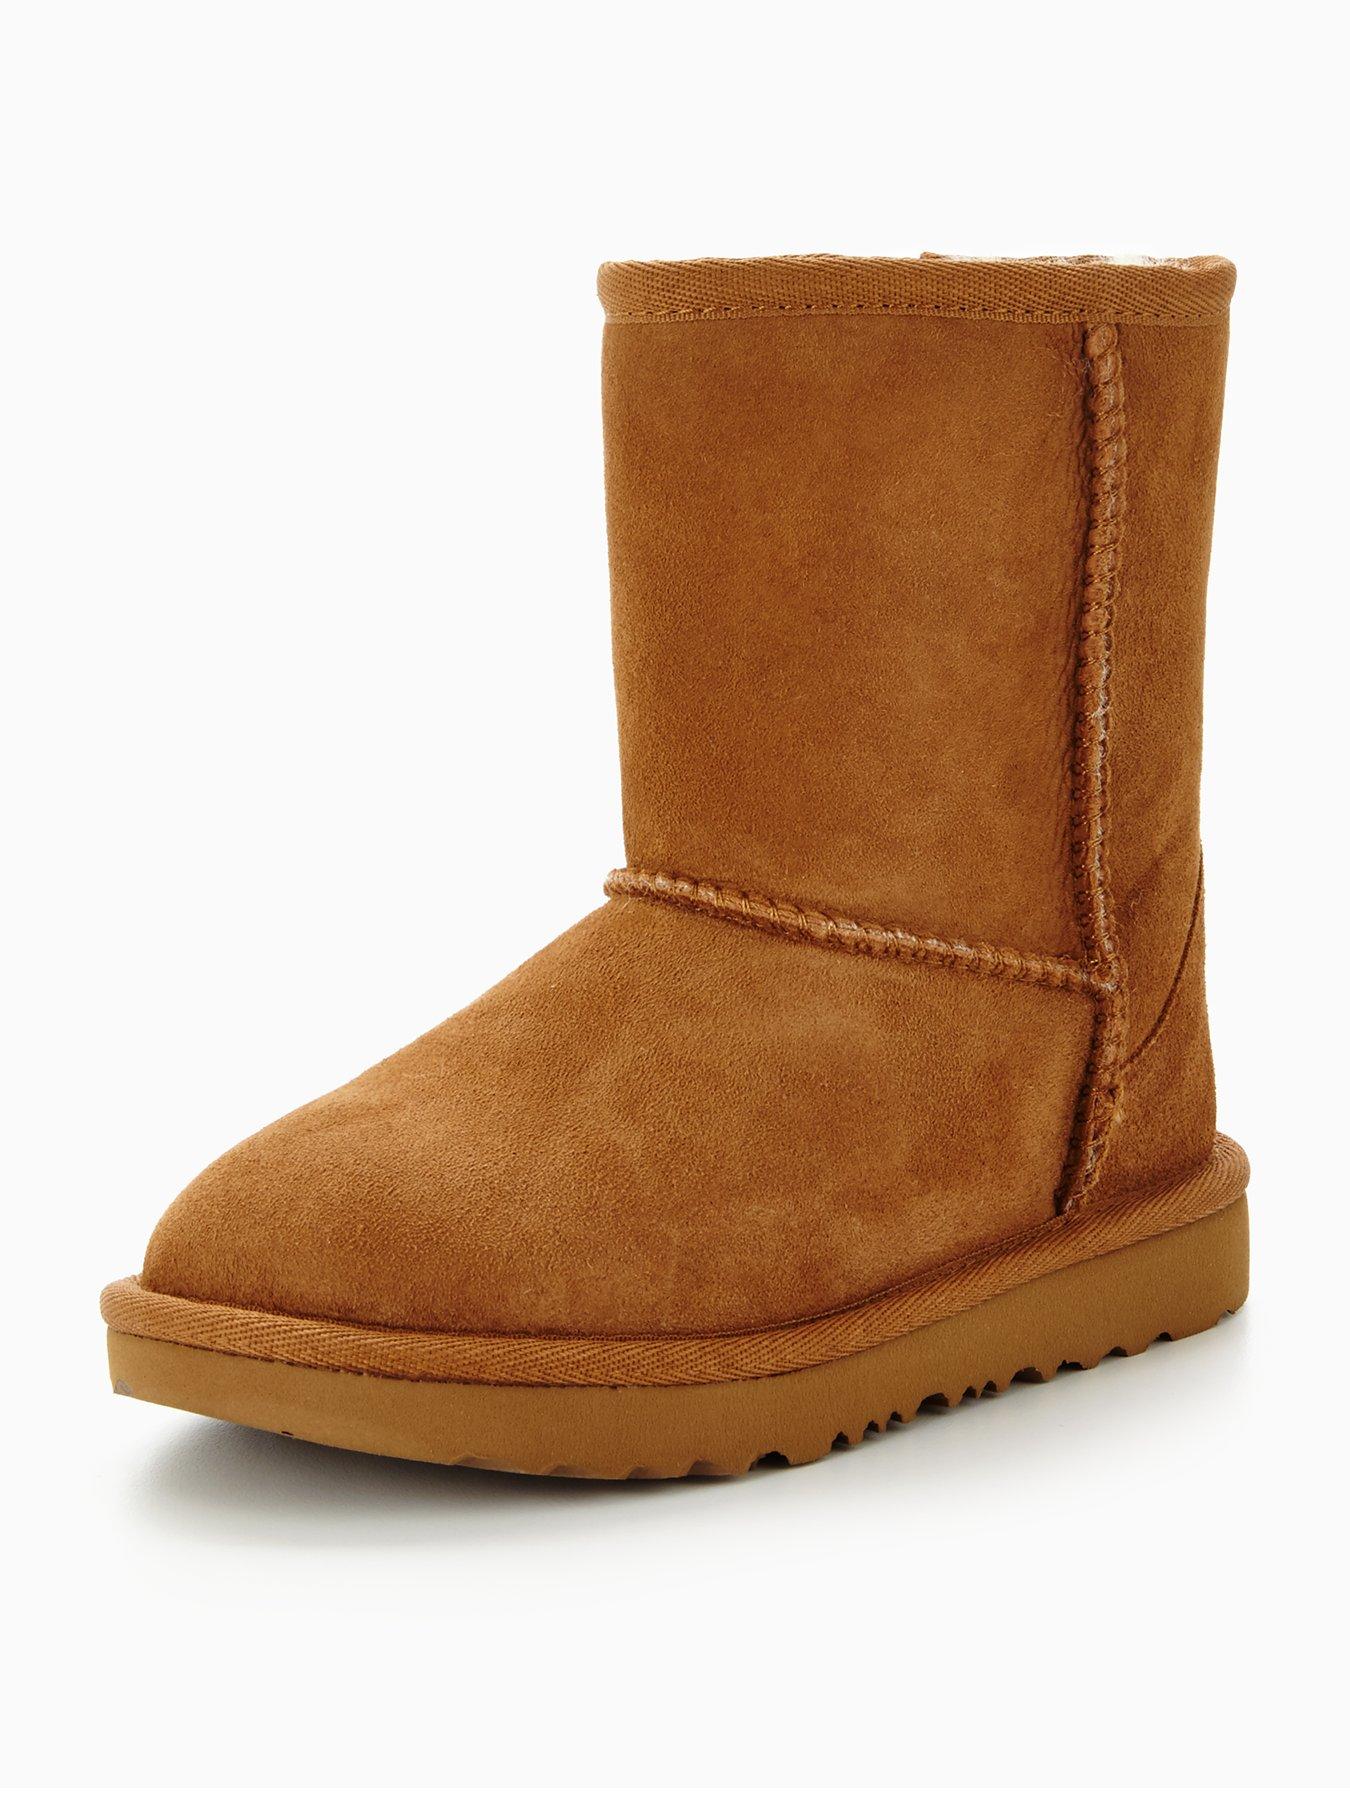 size 1 ugg boots